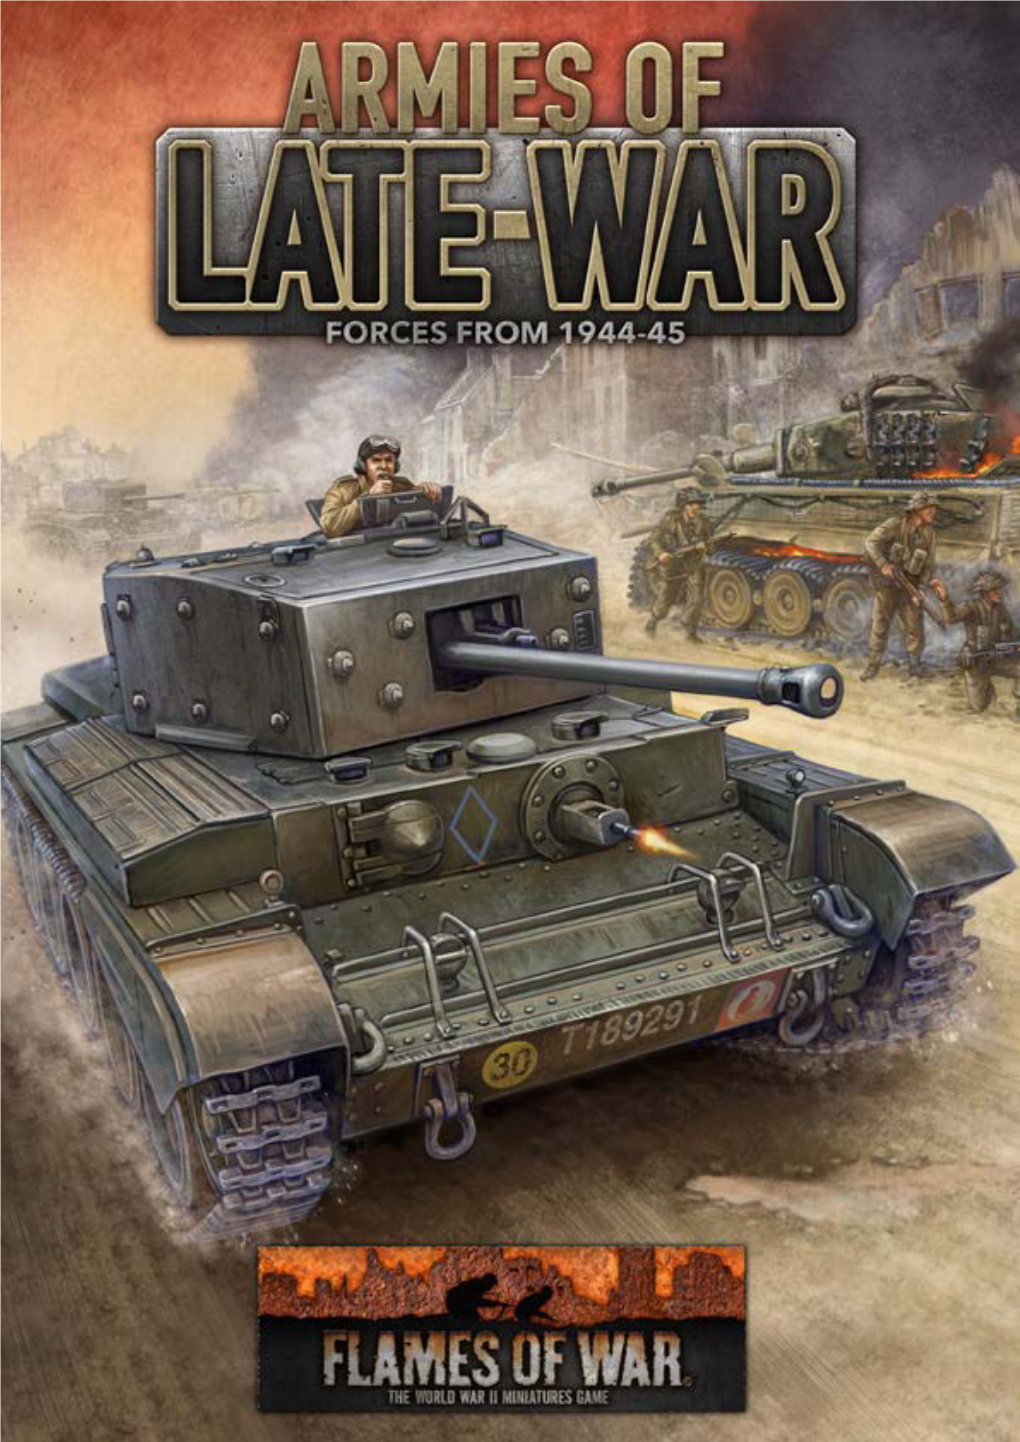 And to Download a Preview of Armies of Late-War Click Here